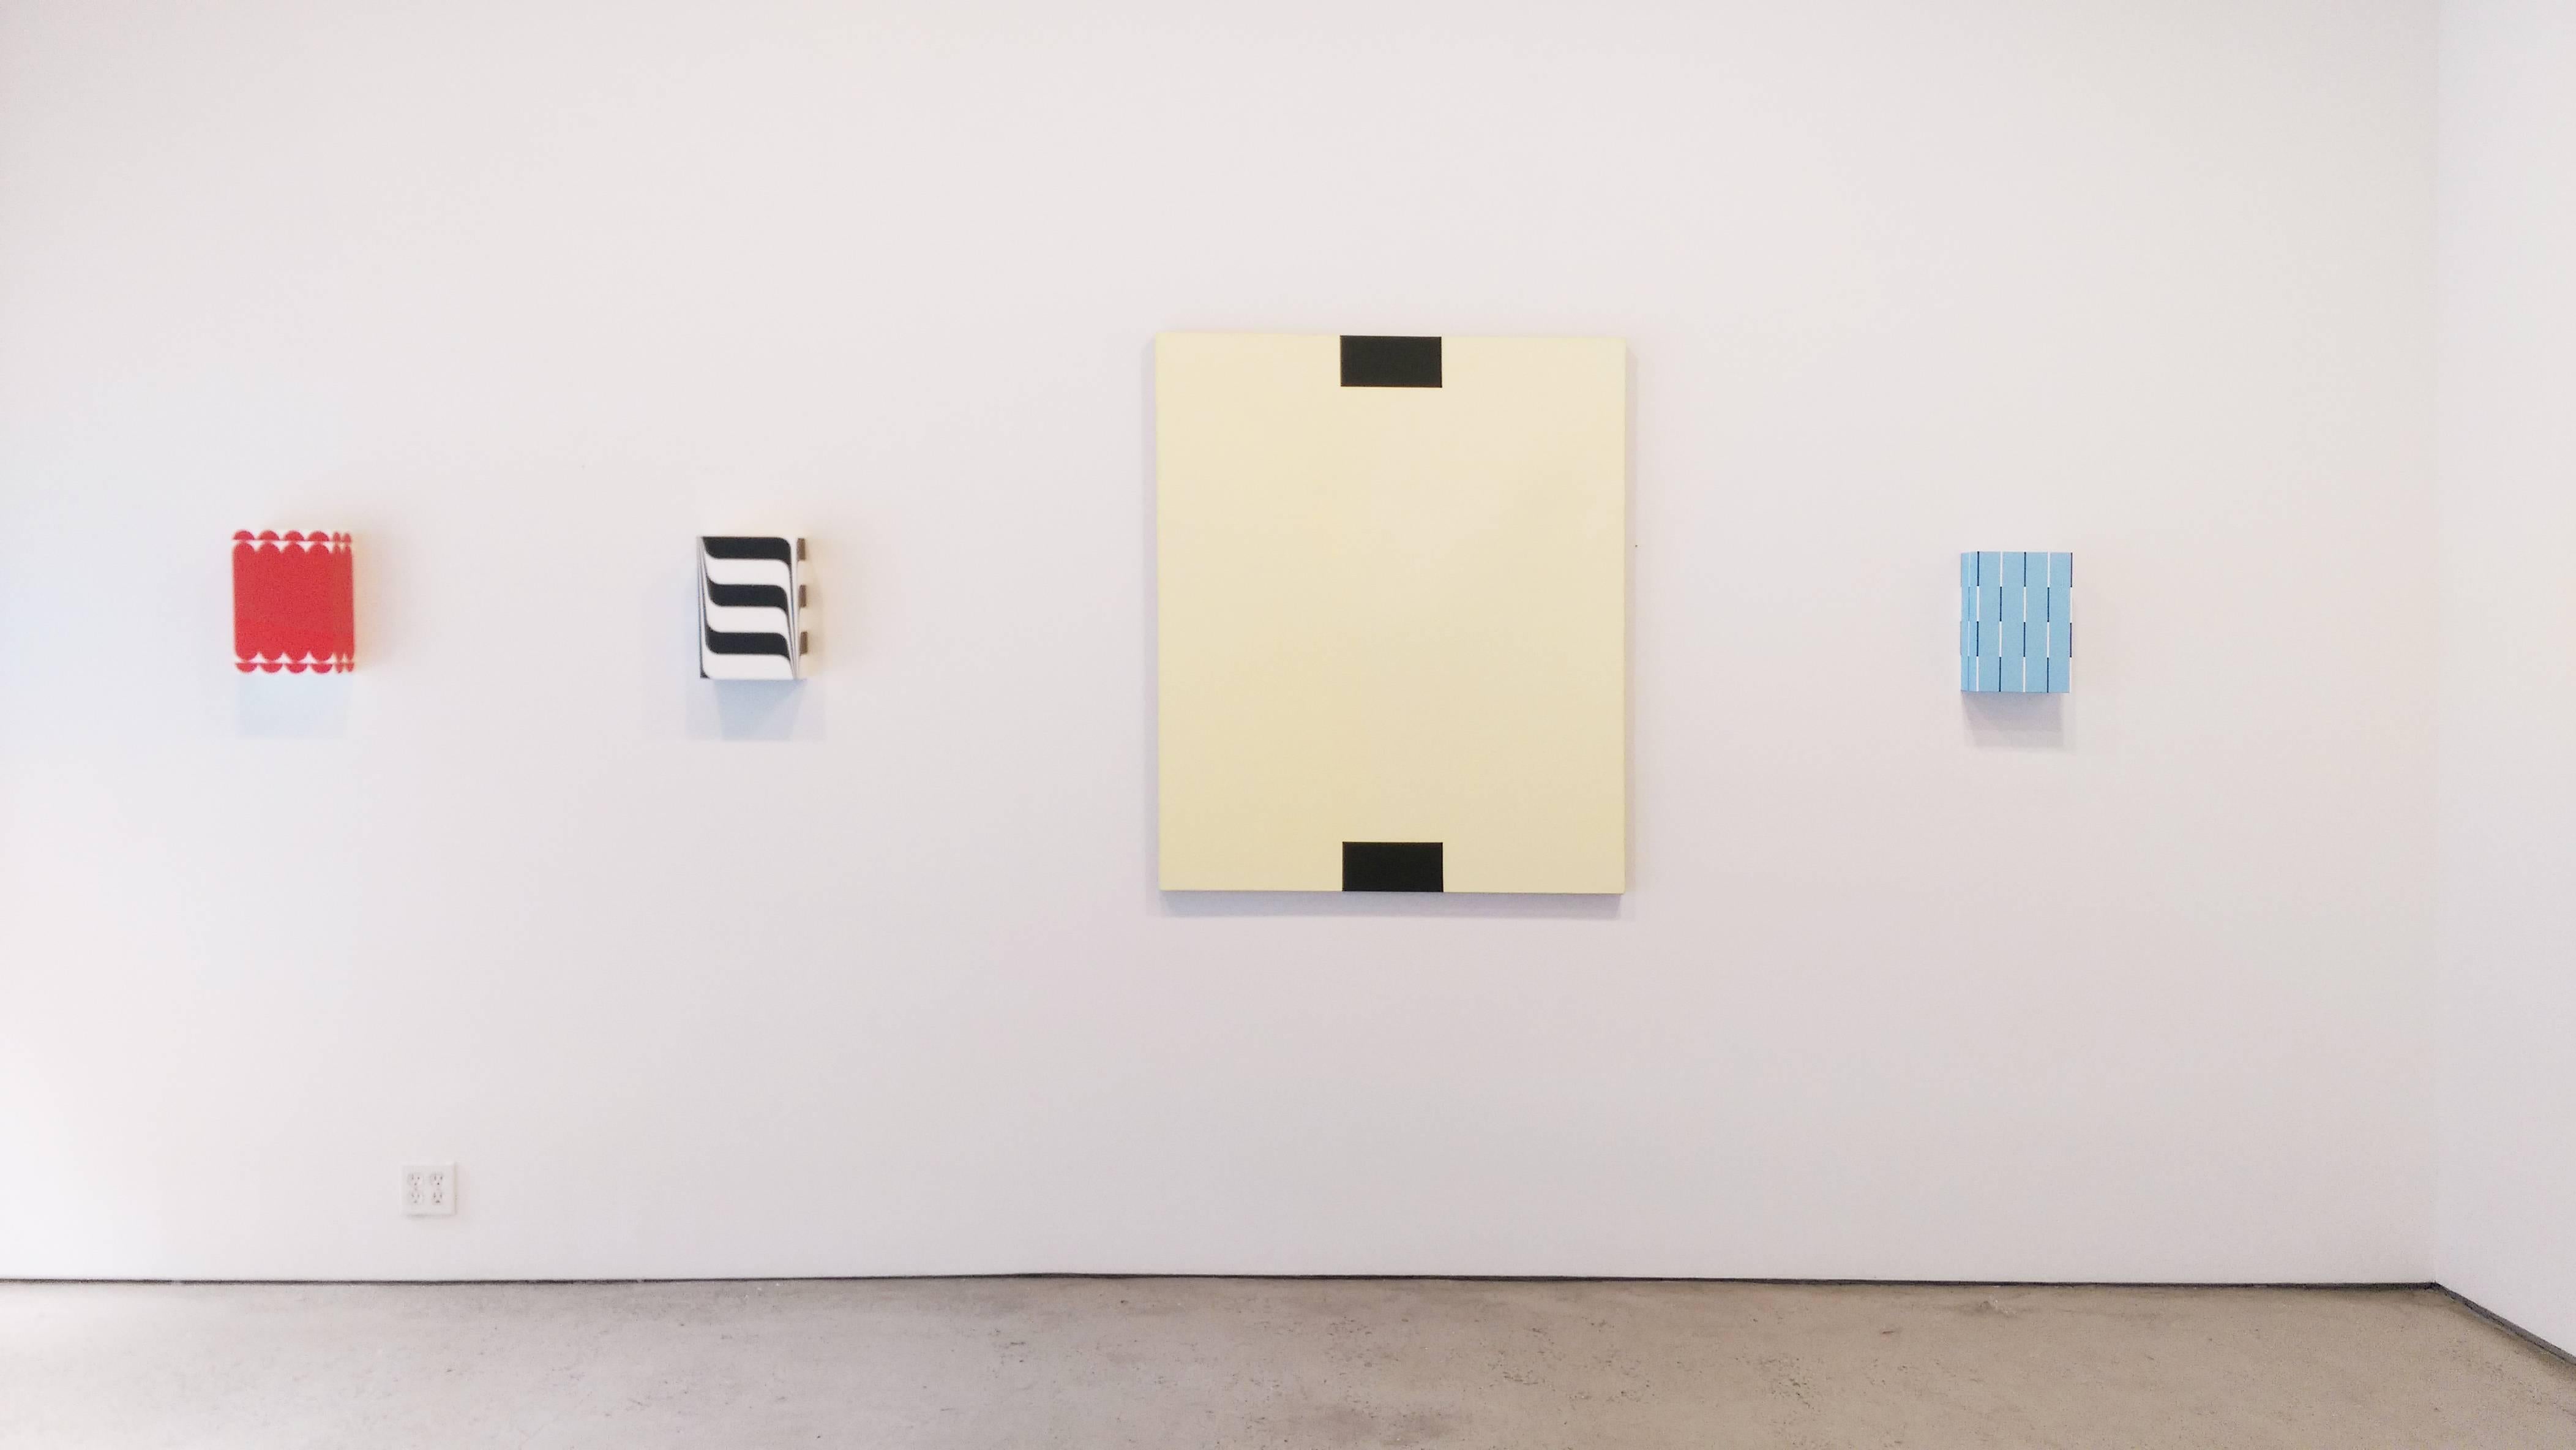 Mambo Italiano is primarily light blue with thin stripes of white and black.

Richard Roth’s small box-like paintings are beautifully crafted and executed with delicate and sharp precision. His vaguely familiar patterns and compositions embody